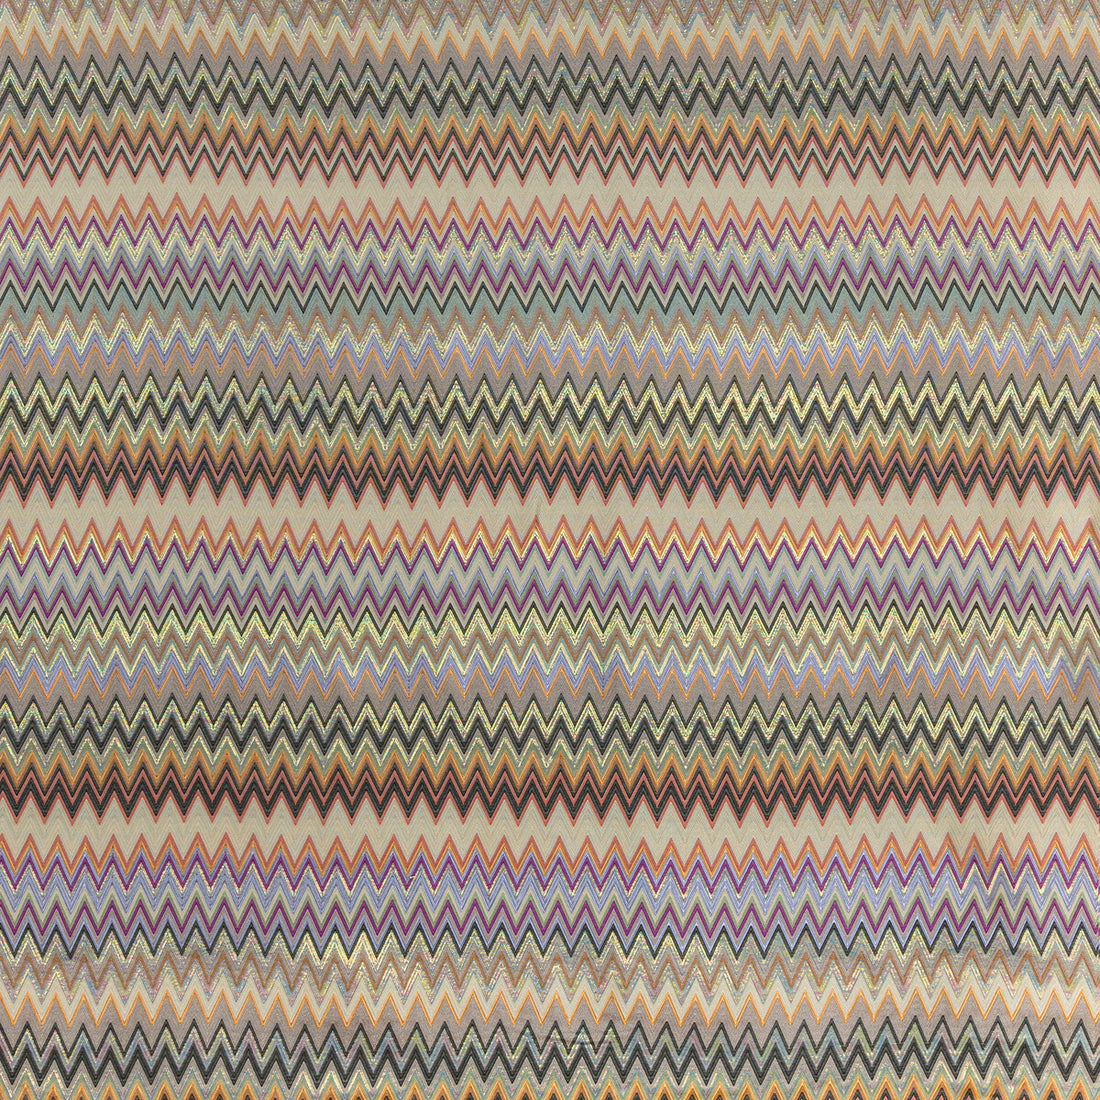 Masuleh fabric in 156 color - pattern 36168.2416.0 - by Kravet Couture in the Missoni Home collection